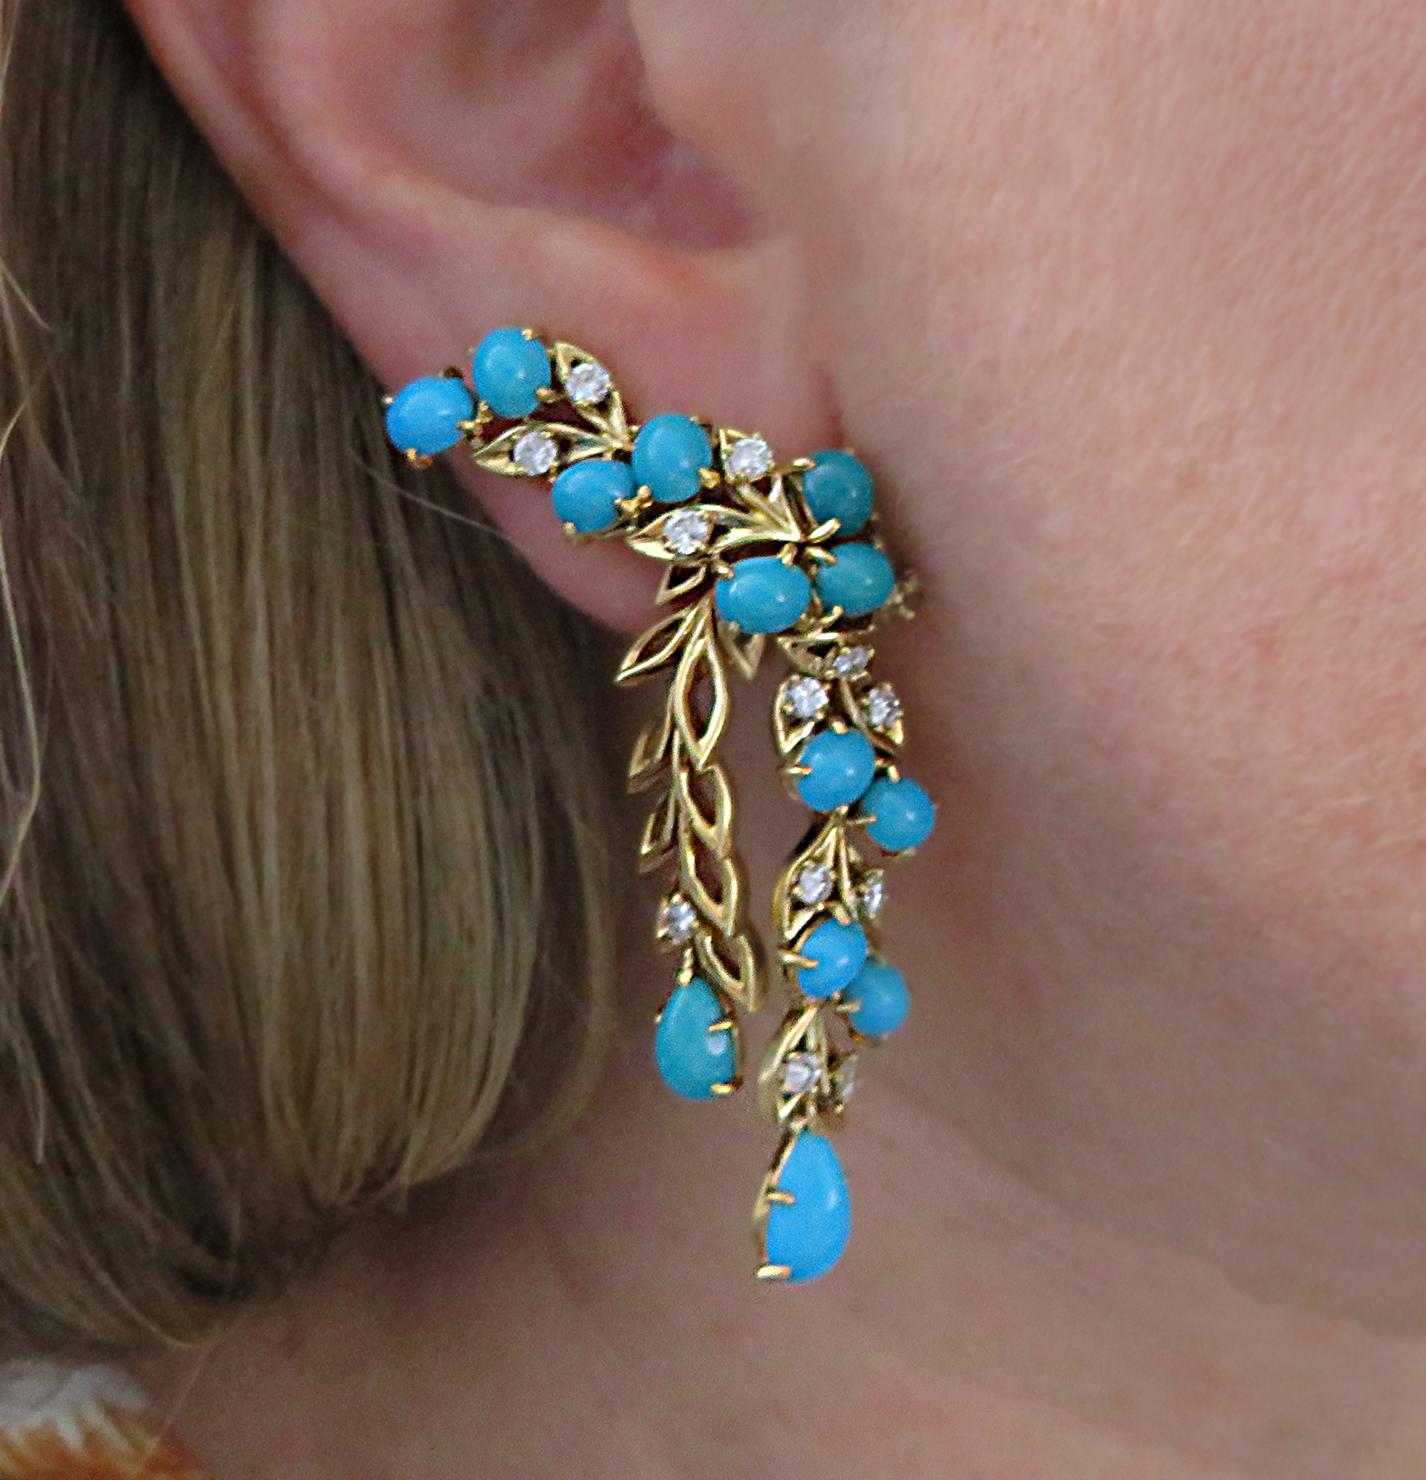 Modern French Cartier Diamond and Turquoise Earrings, circa 1960